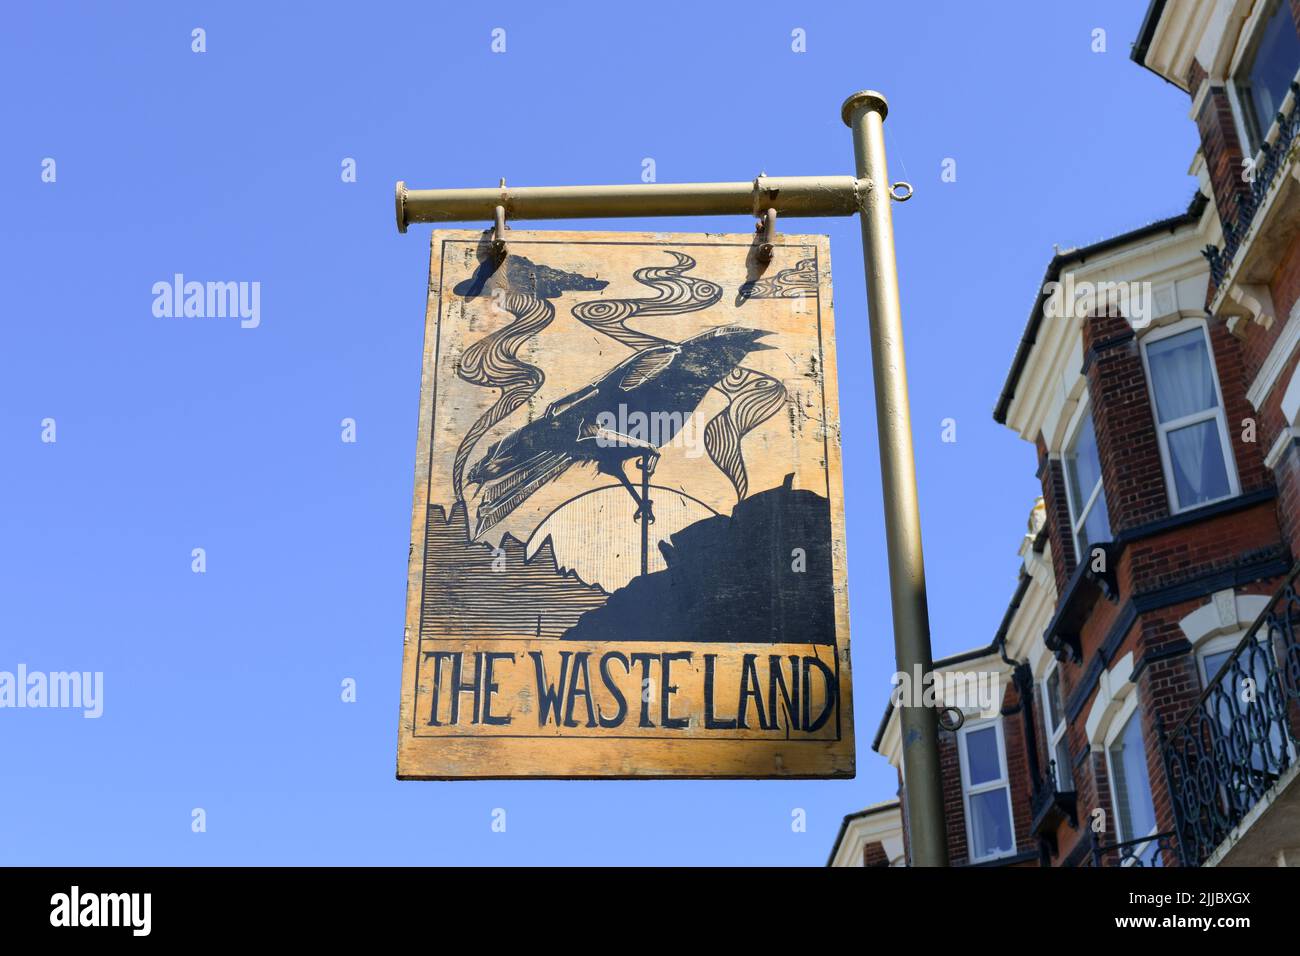 The Waste Land pub sign, The Albion Rooms, Ciftonville, Margate, Kent, England, UK Stock Photo